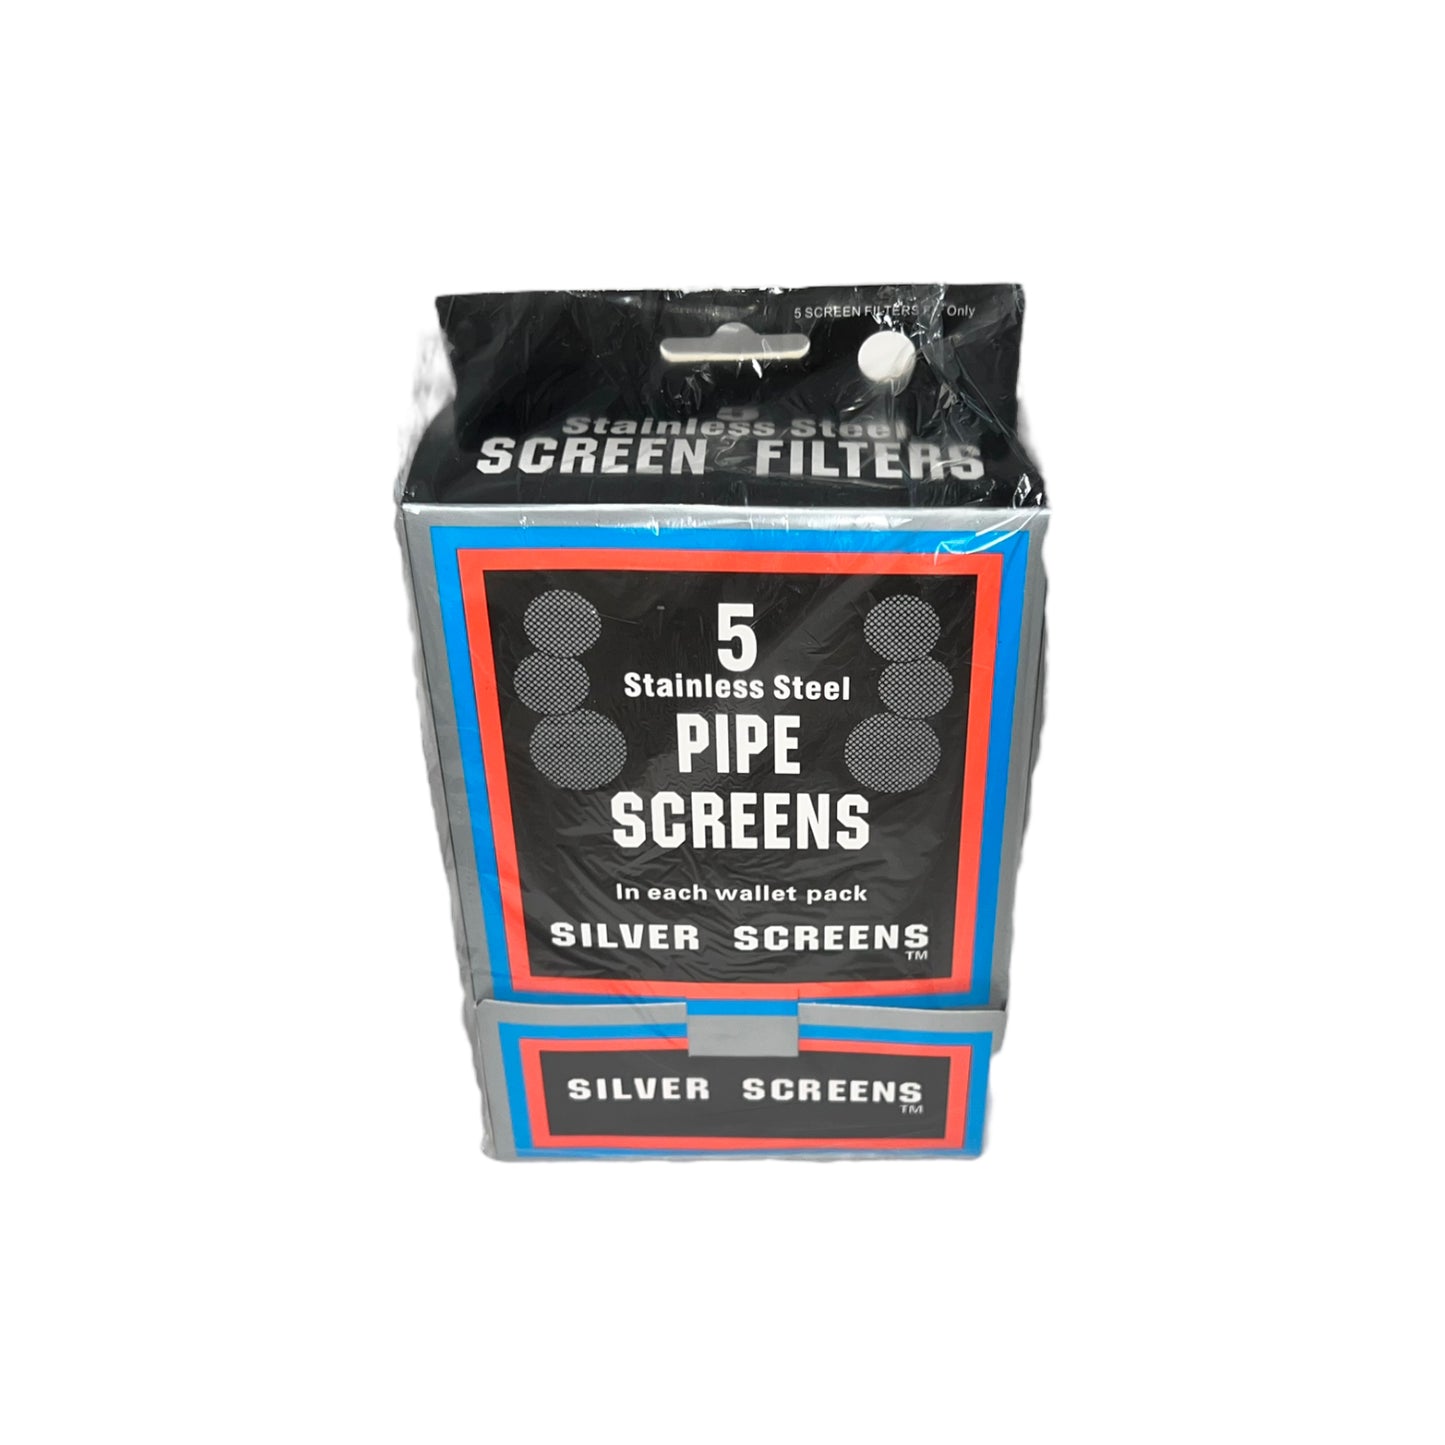 Stainless Steel Pipe Screen Filters